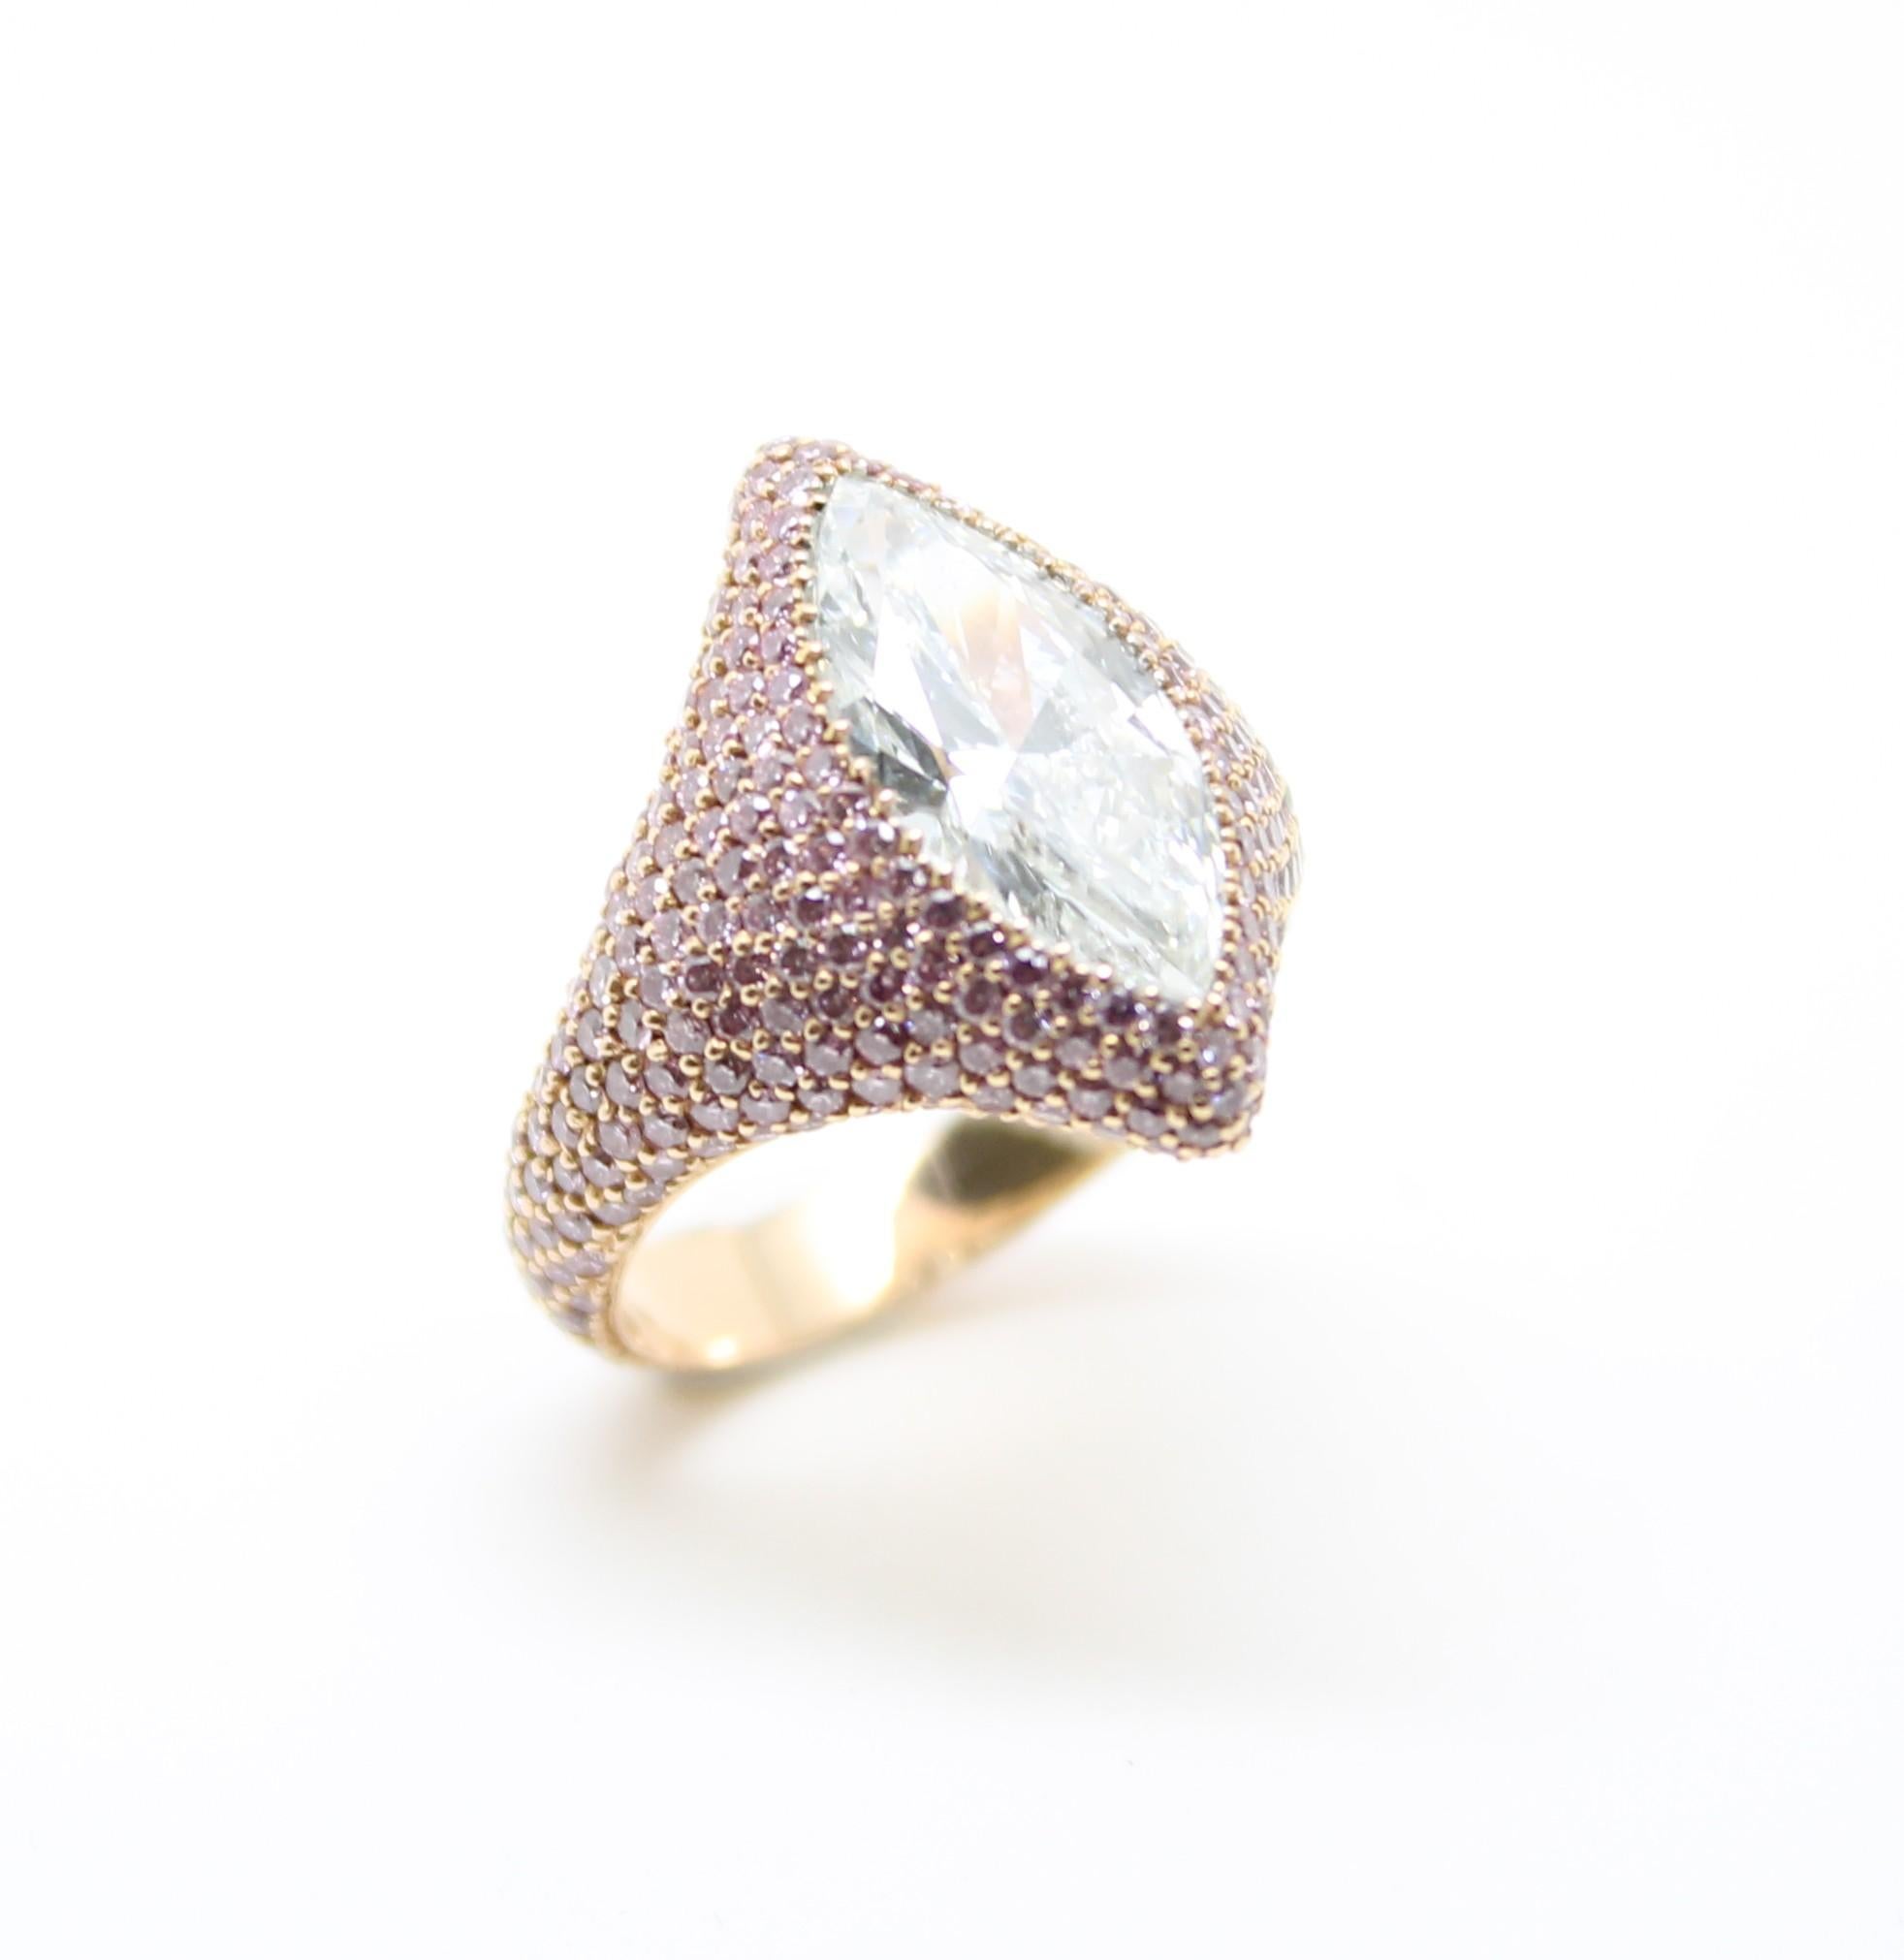 Contemporary GIA Certified 3.00 Carat Marquise Diamond and Pink Argyle Diamond Cocktail Ring